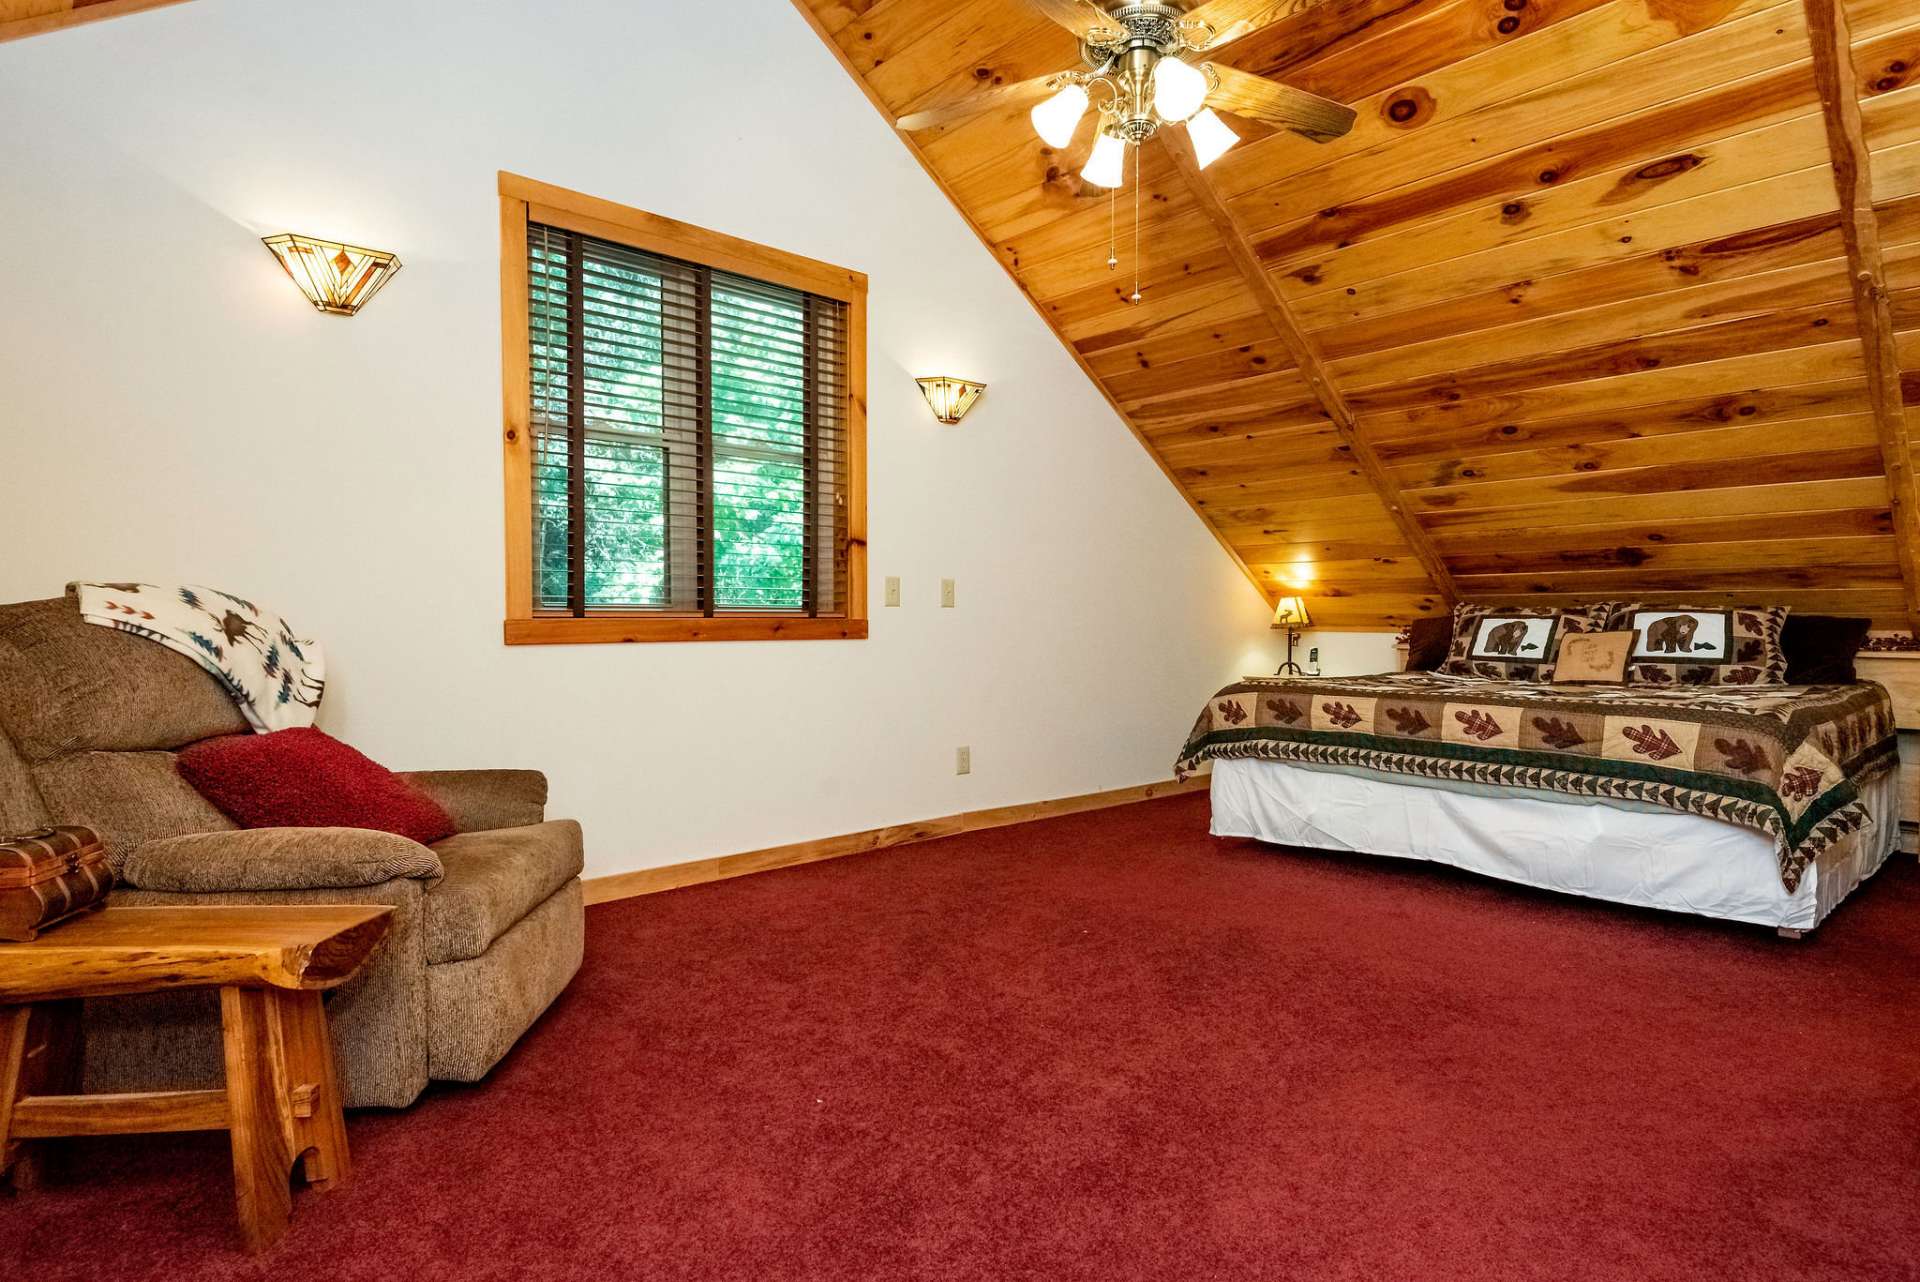 This home offers spacious bedrooms throughout for you and your guests.